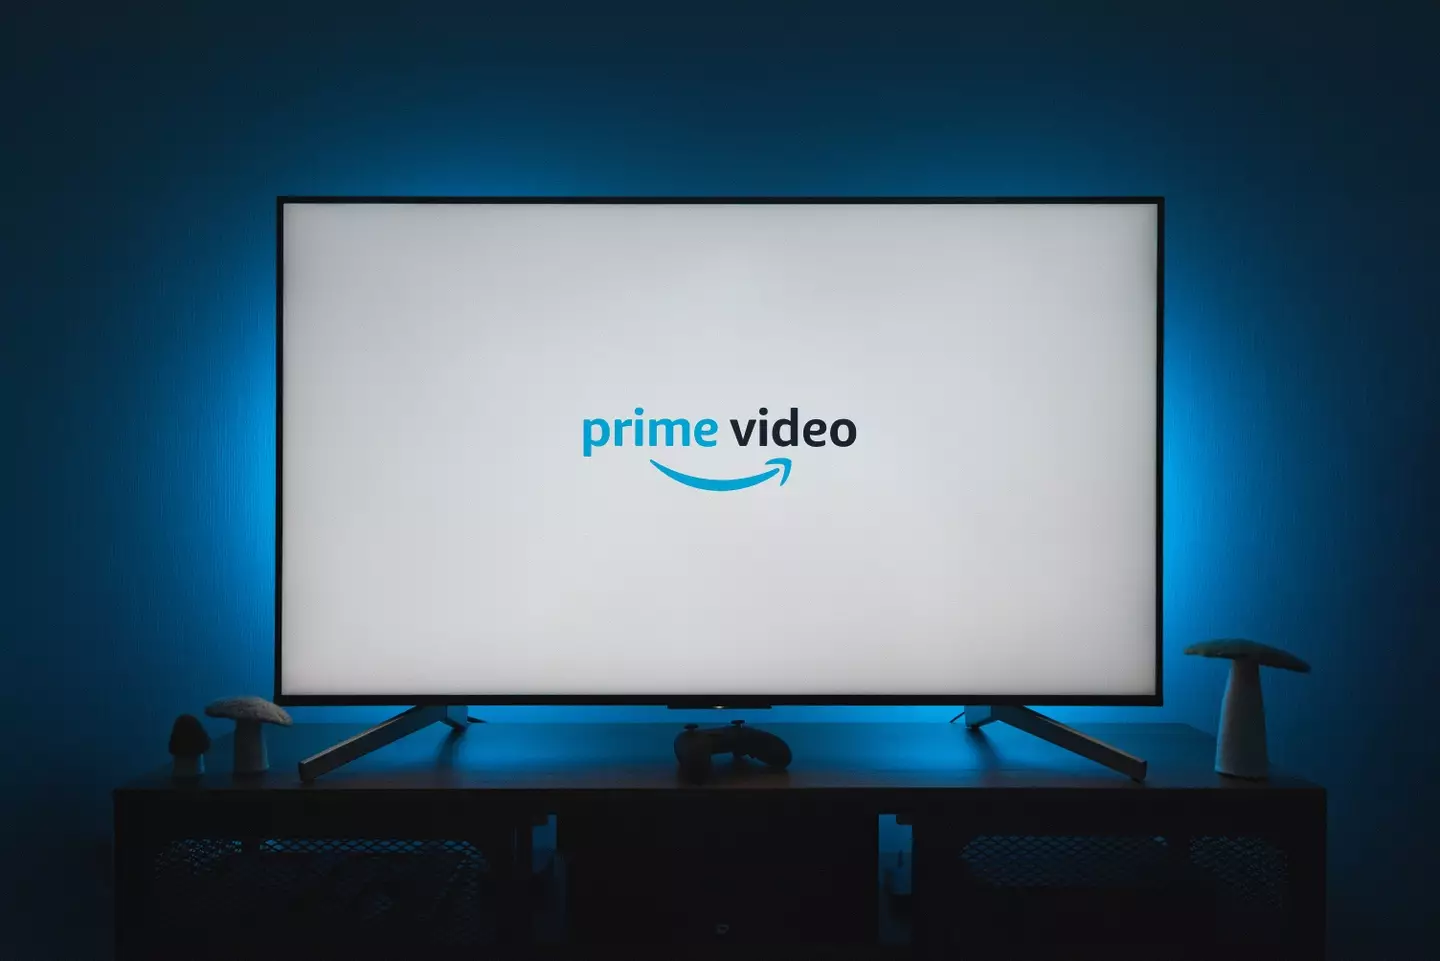 Amazon Prime Video lashed out at Netflix.